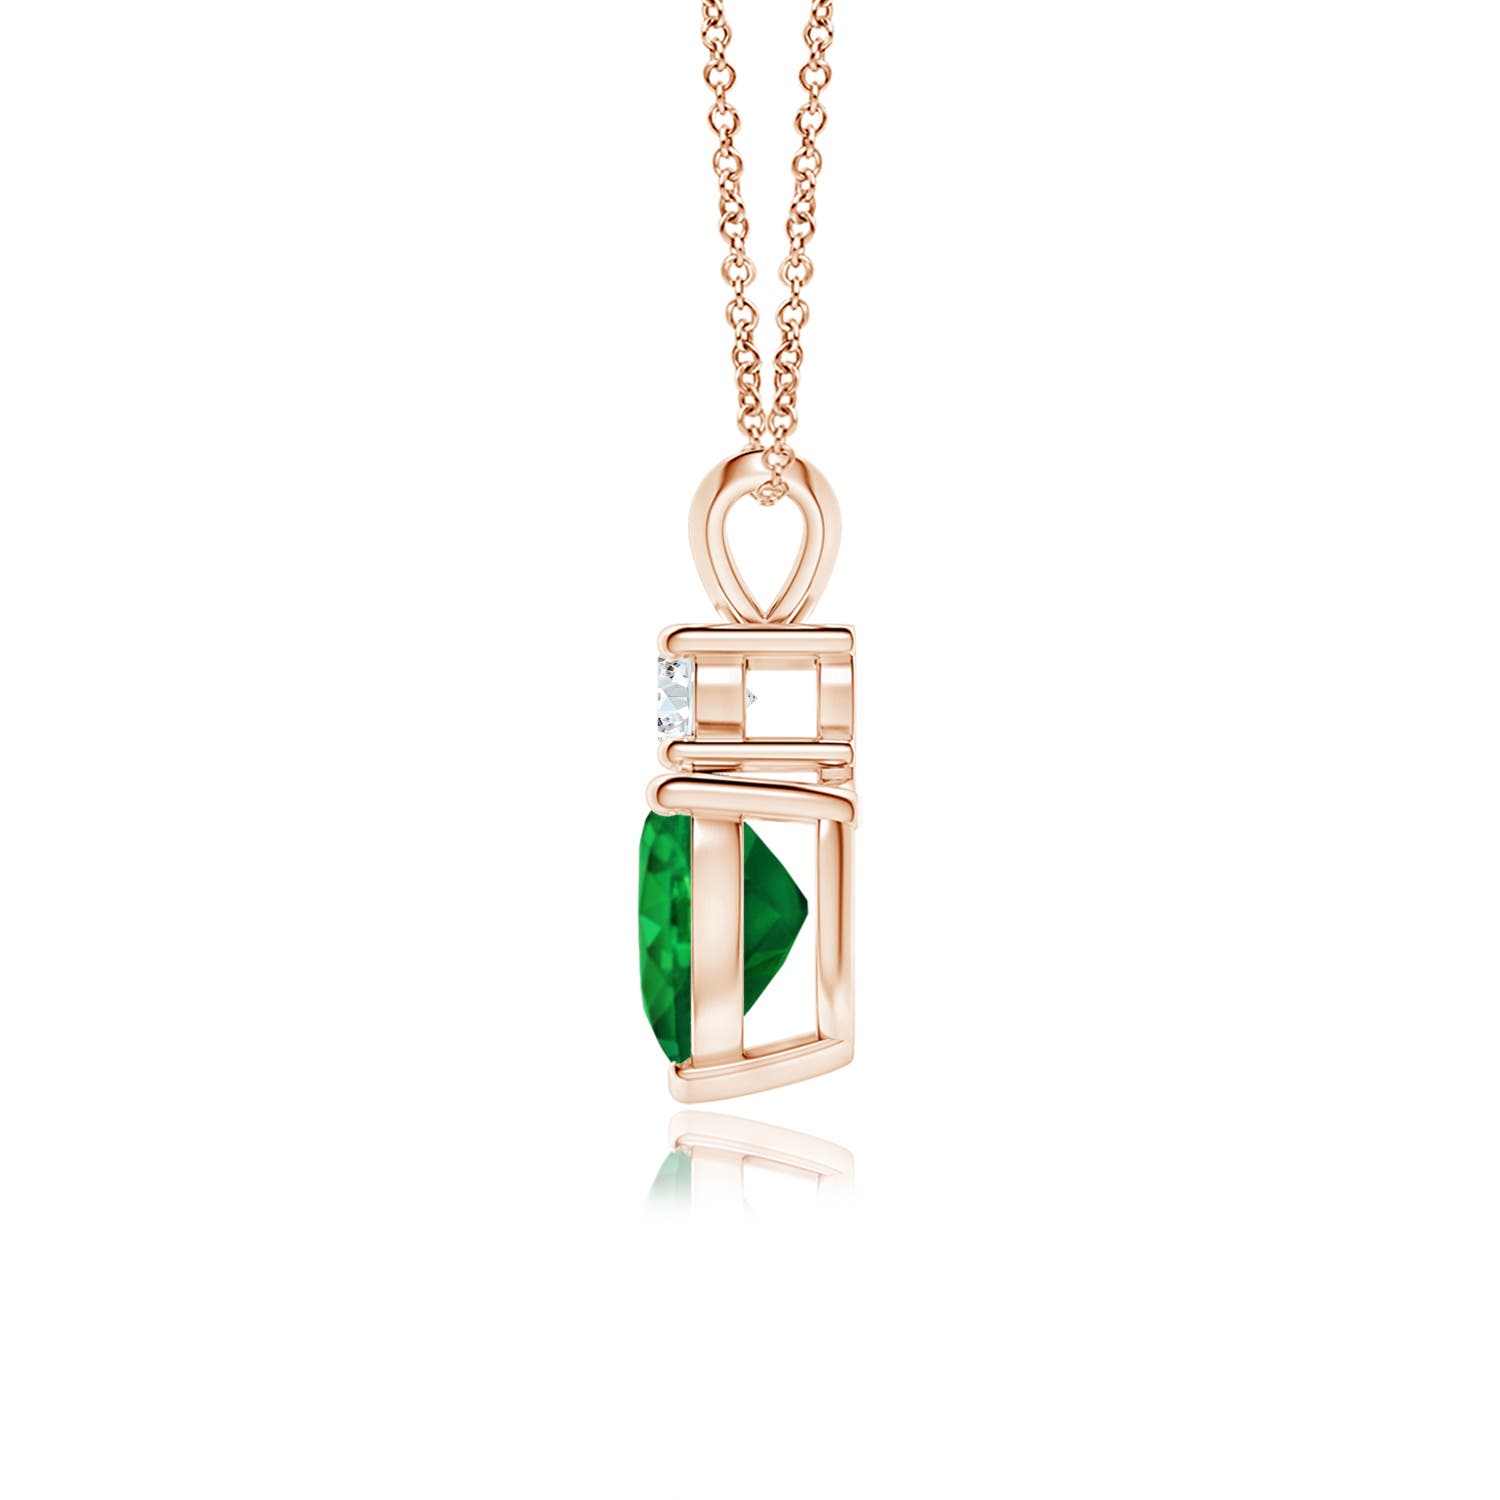 AAA - Emerald / 1.35 CT / 14 KT Rose Gold